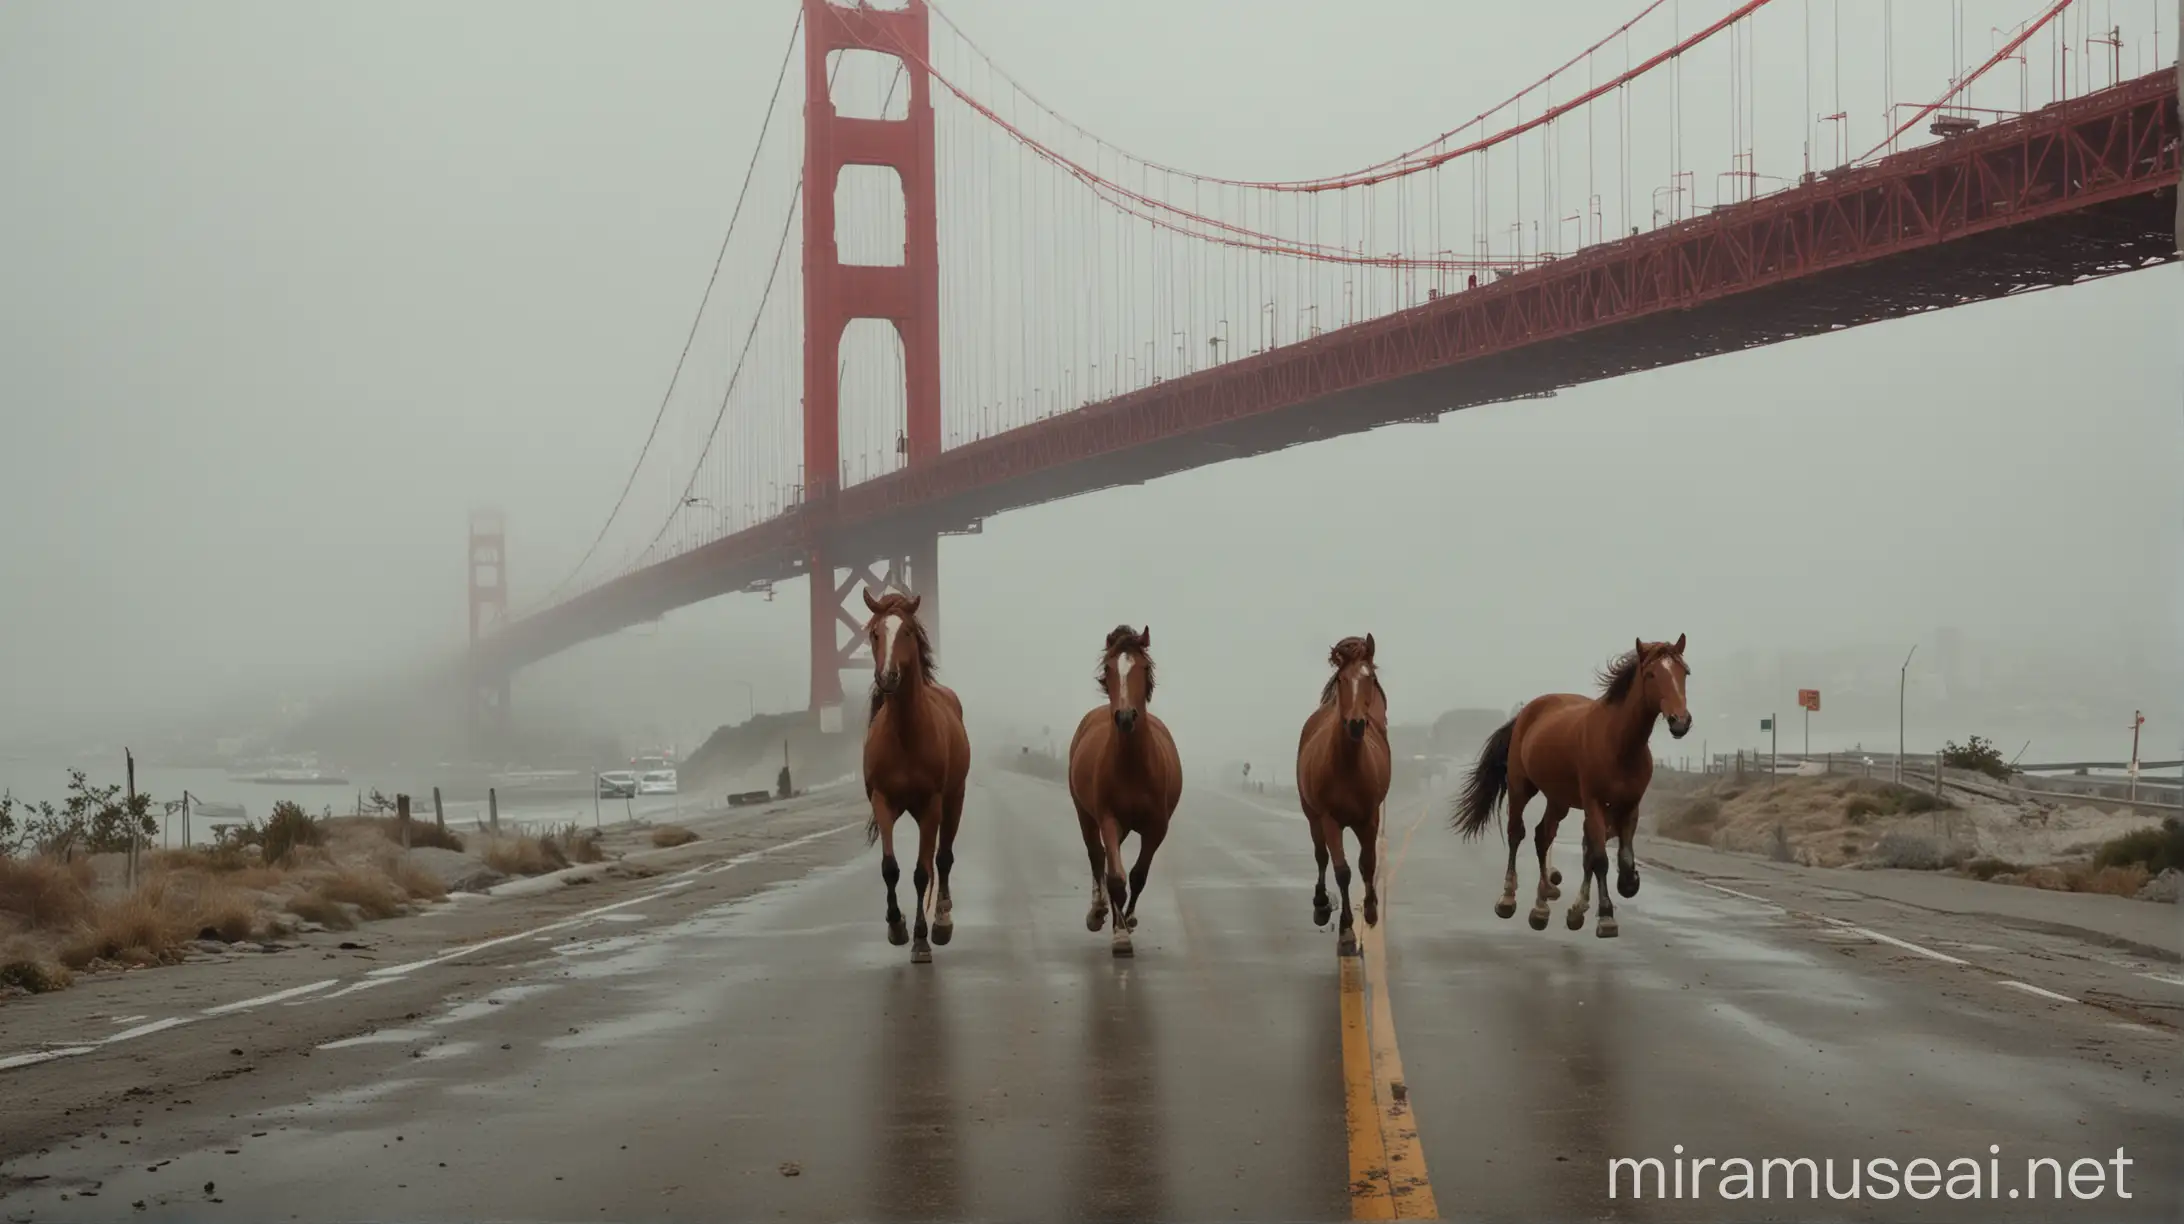 use giuys in the picture on first plan, put behind them a wild horses running on concrete, behind there is visible red san francisco bridge, everything is foggy, whole image should look like movie poster

